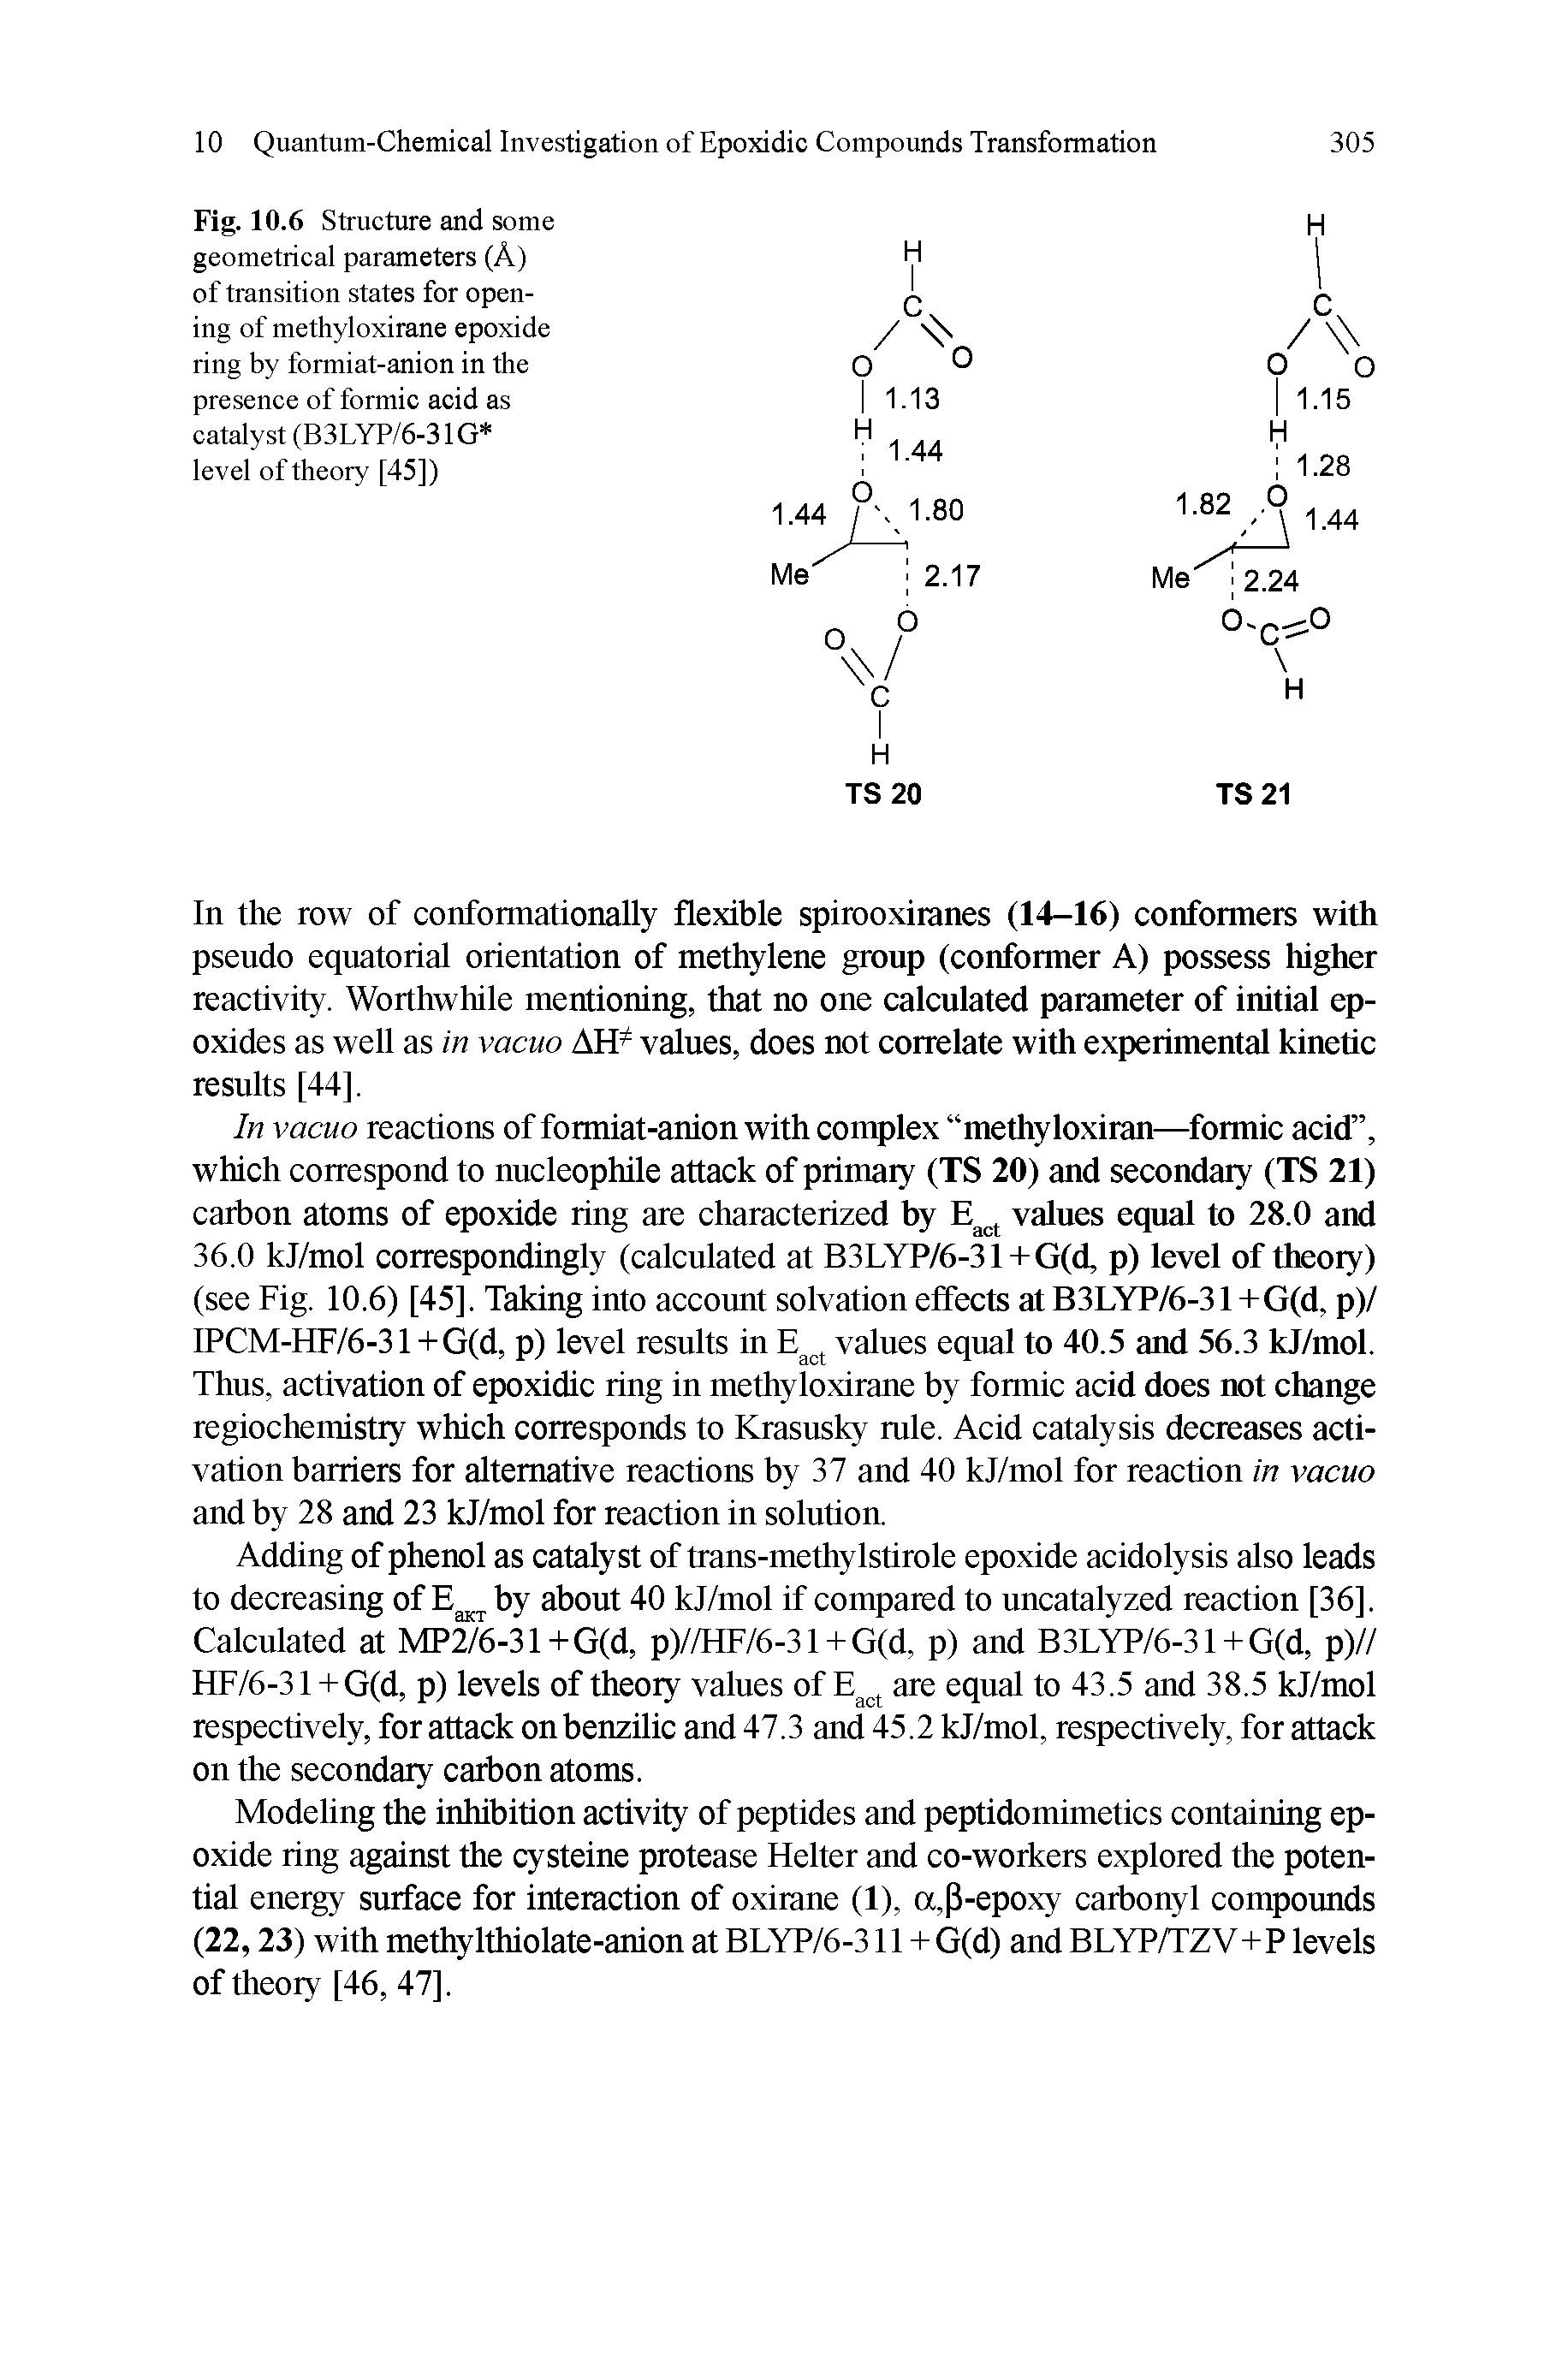 Fig. 10.6 Structure and some geometrical parameters (A) of transition states for opening of methyloxirane epoxide ring by formiat-anion in the presence of formic acid as catalyst (B3LYP/6-31G level of theory [45])...